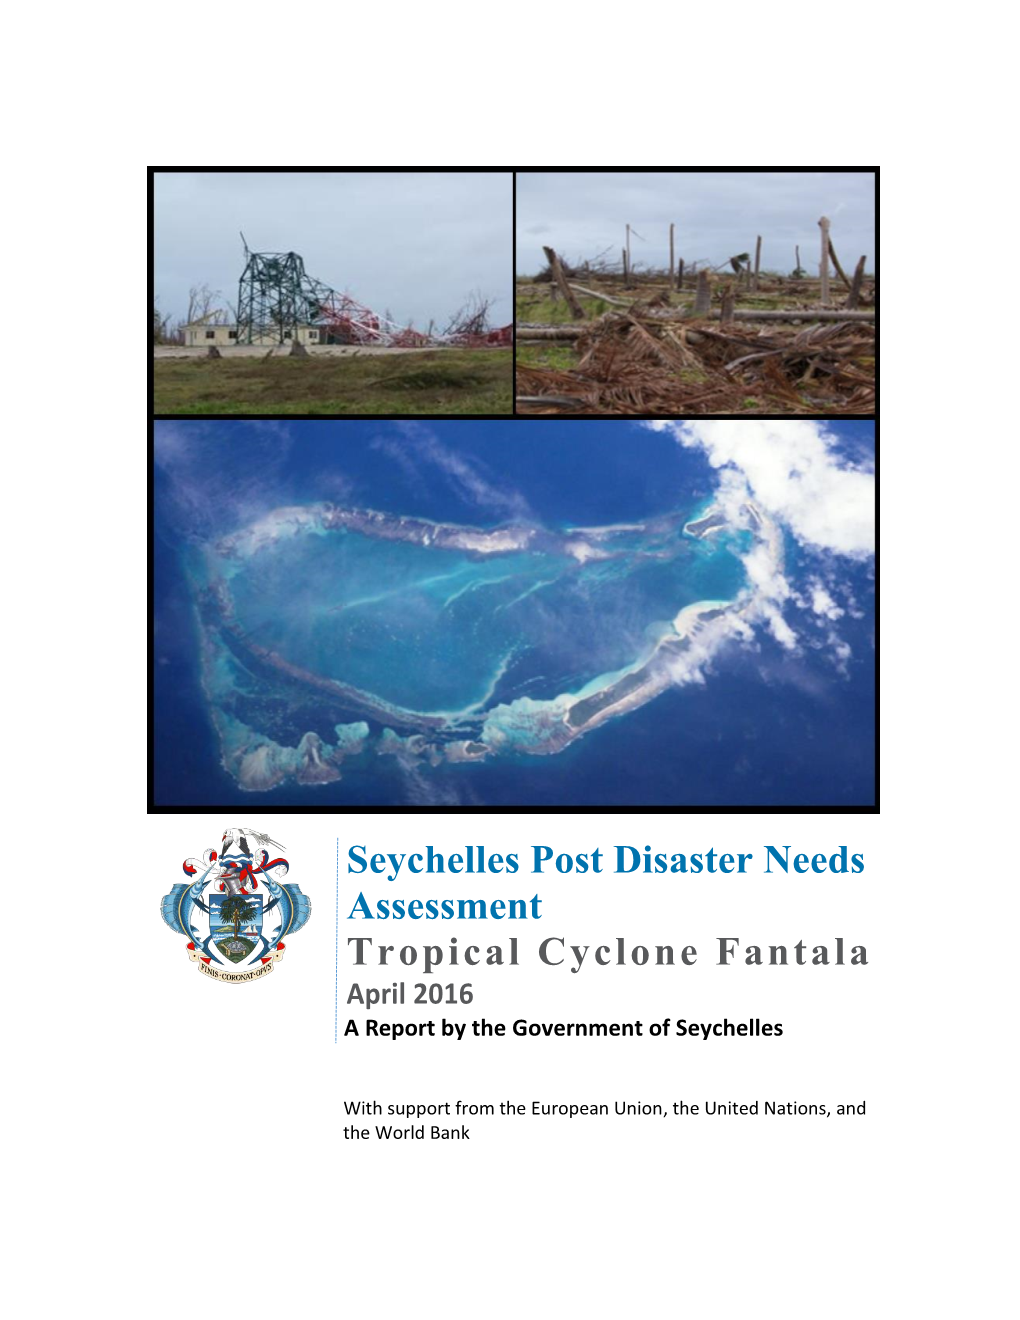 Seychelles Post Disaster Needs Assessment Tropical Cyclone Fantala